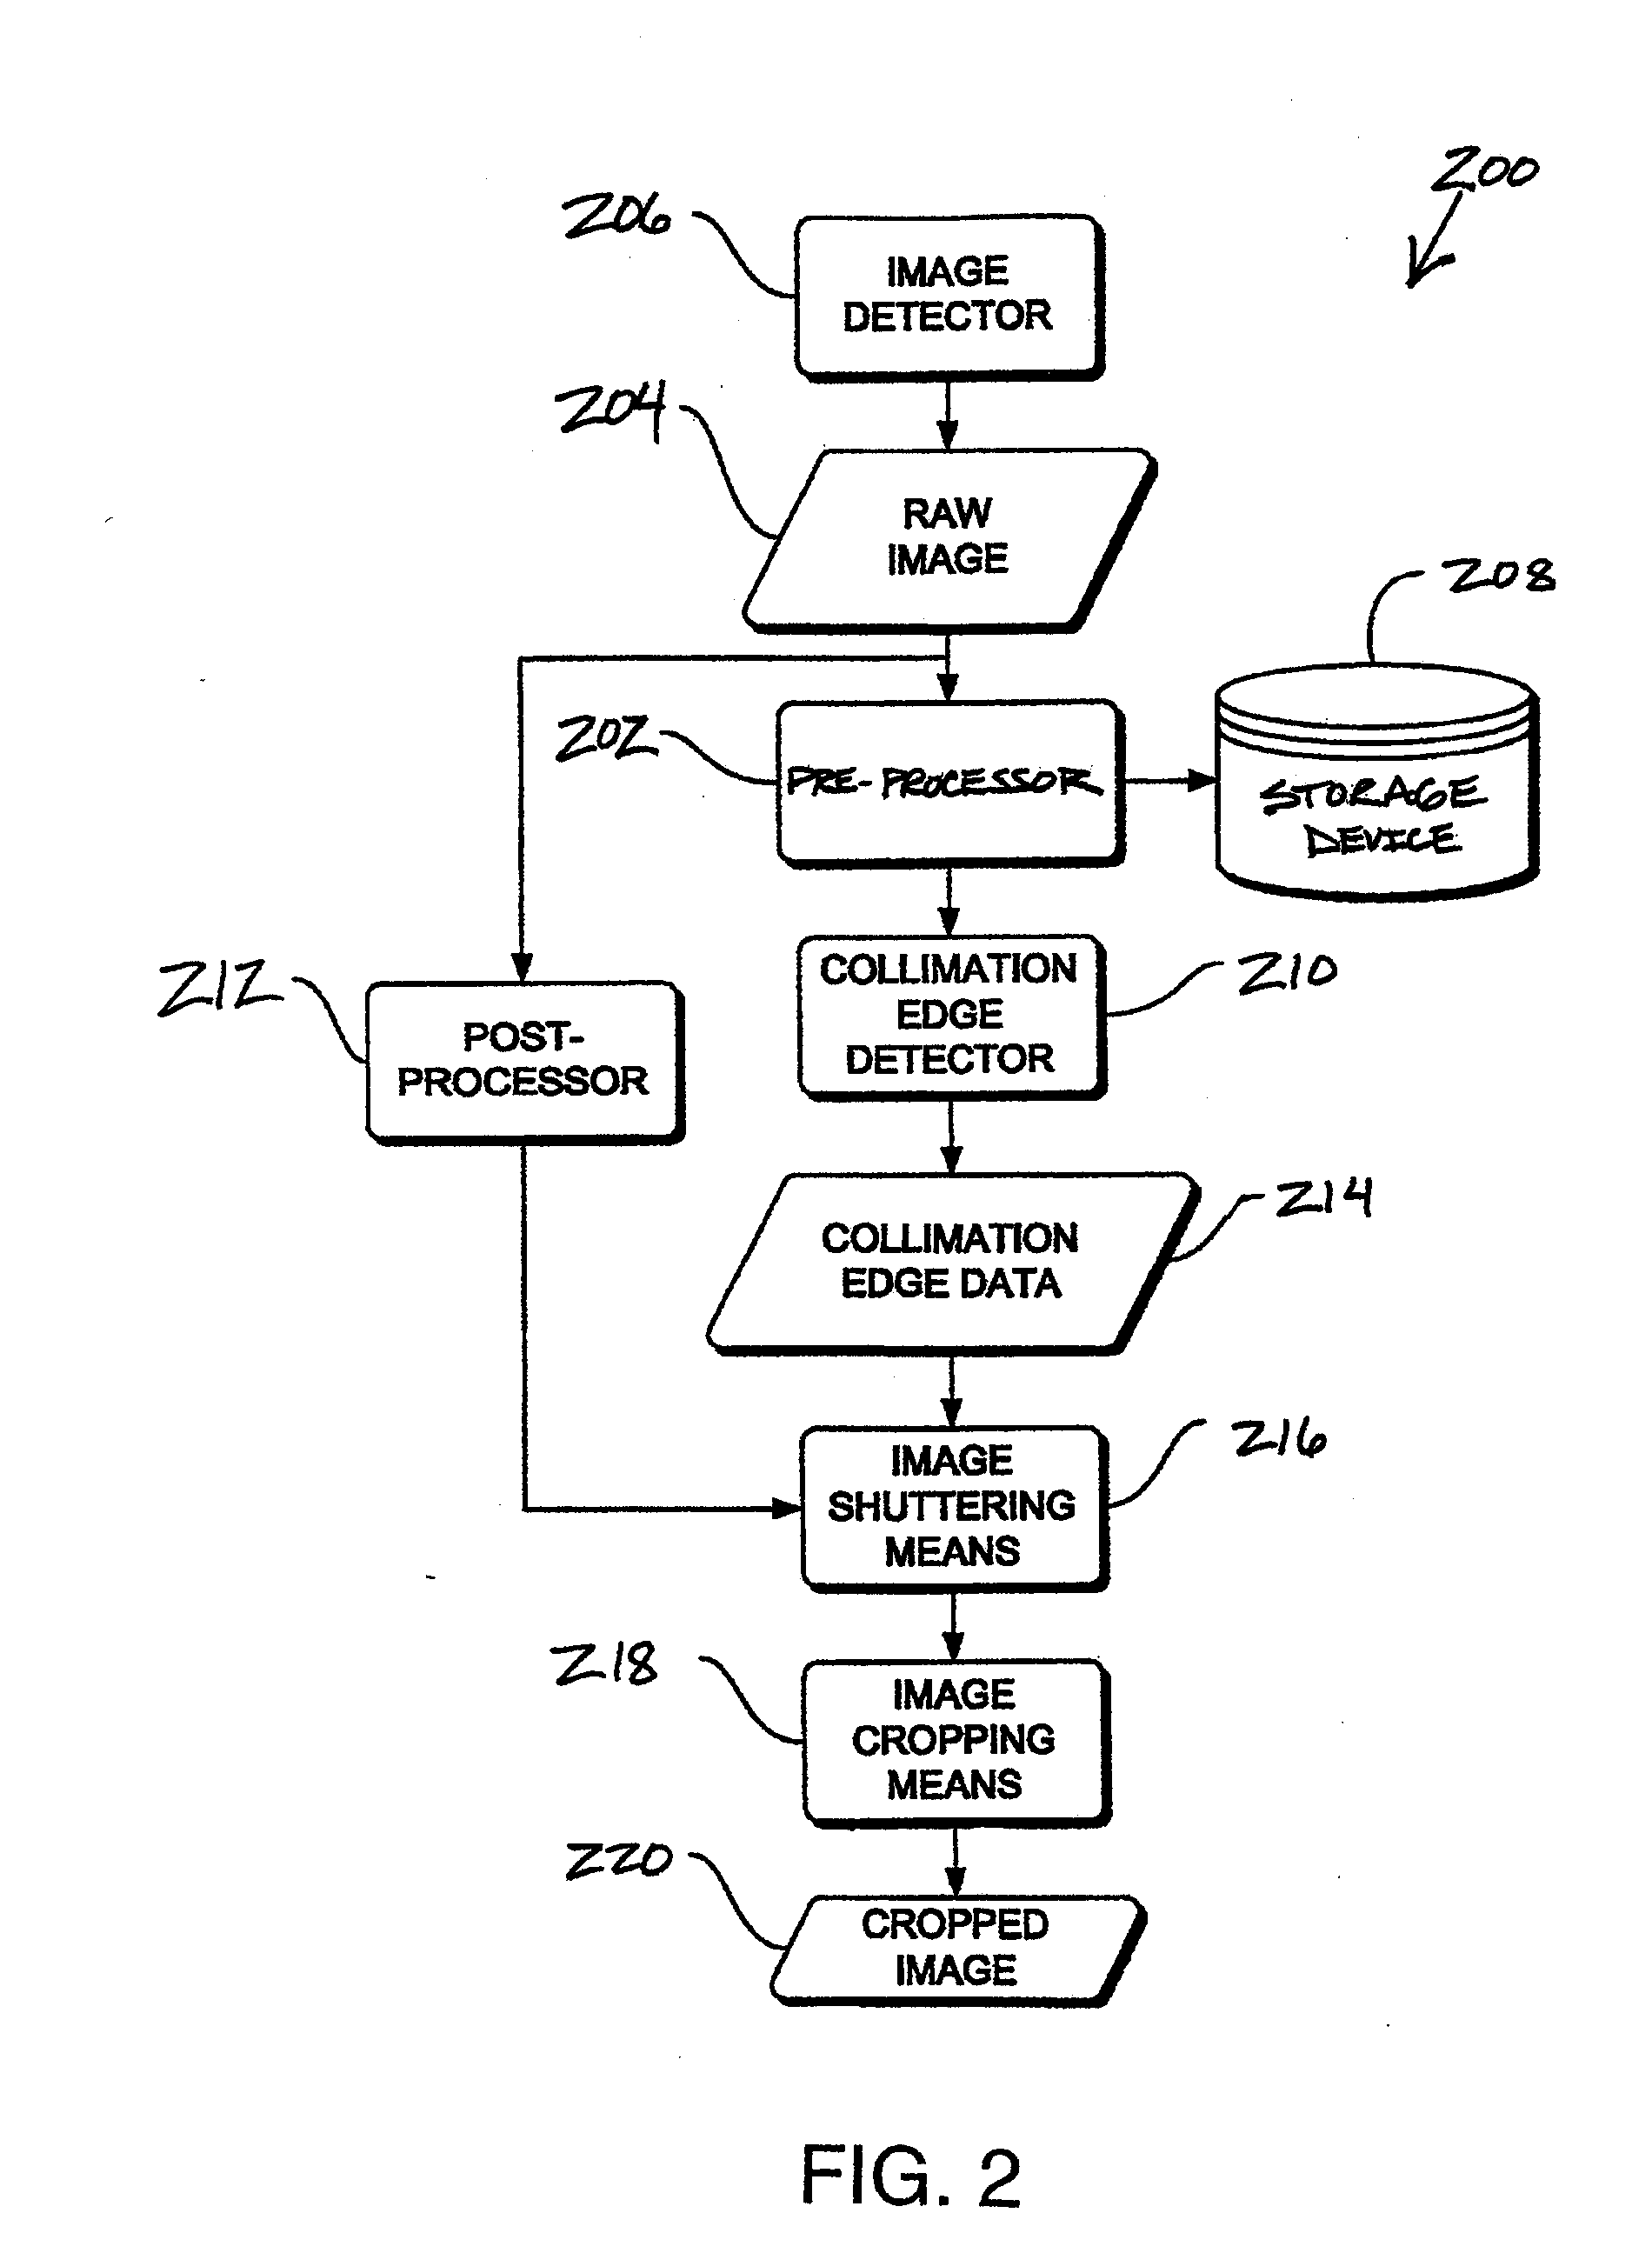 System and method of determining the exposed field of view in an x-ray radiograph